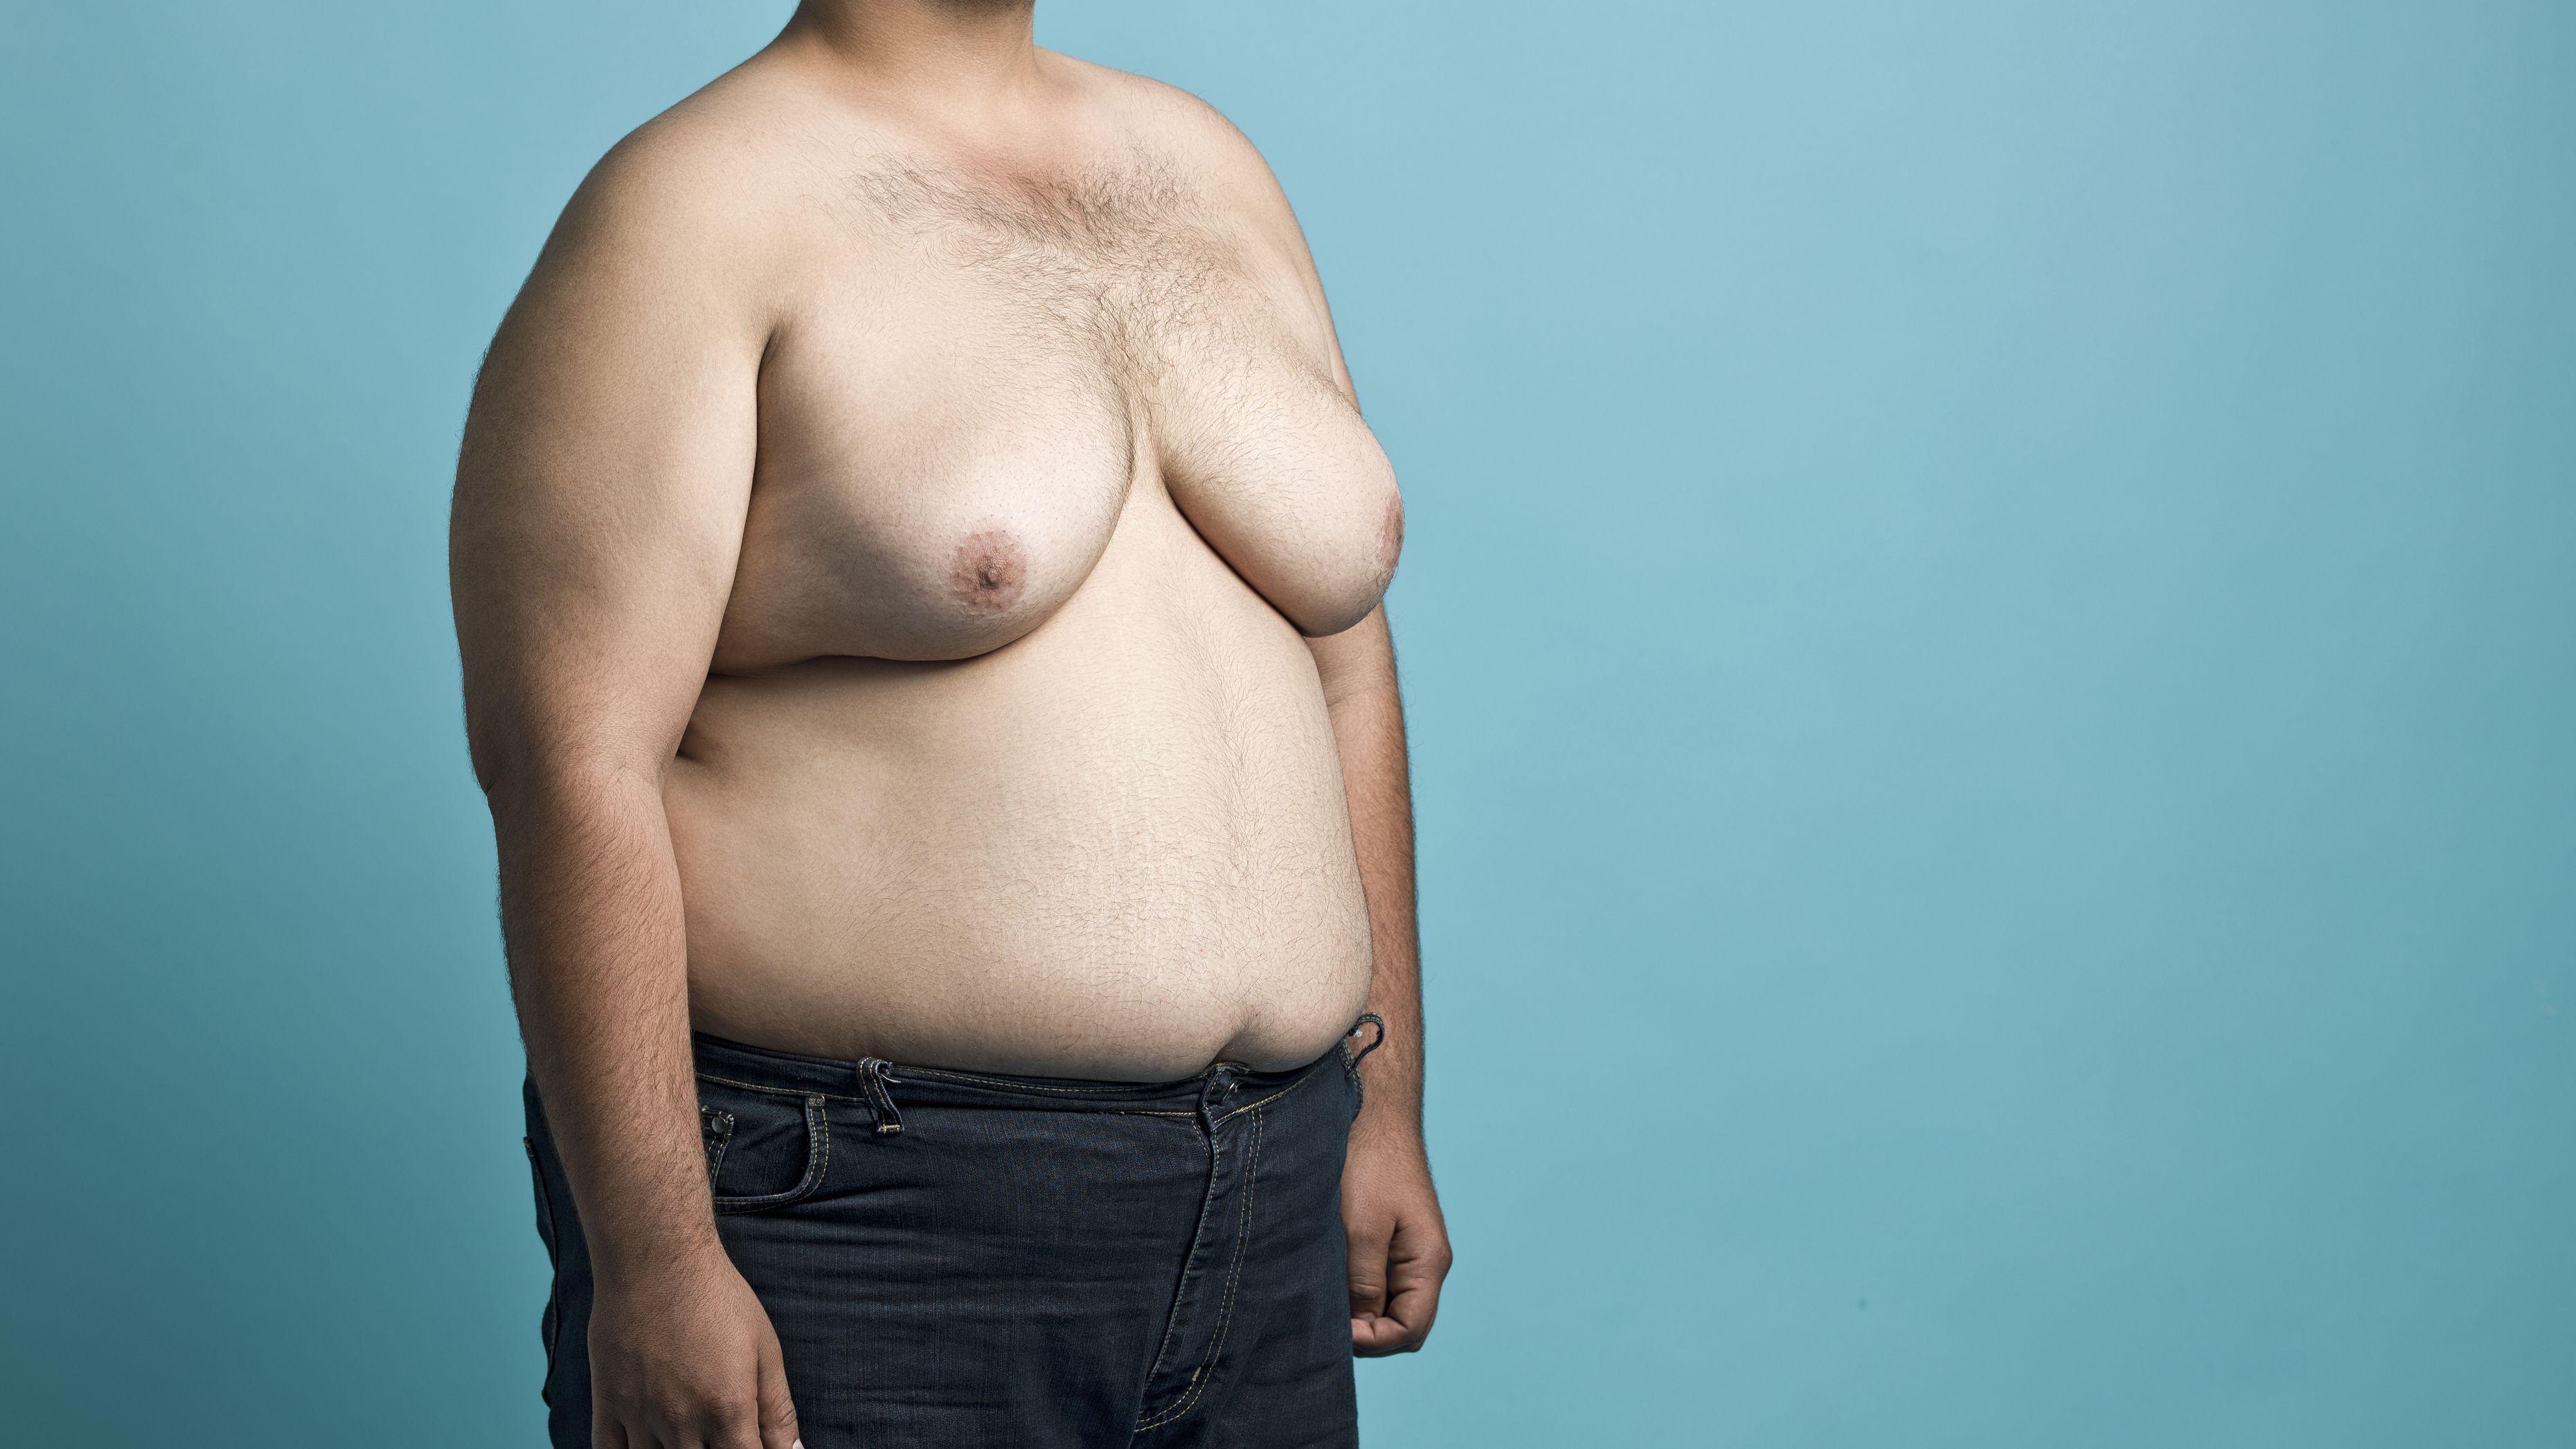 Scientists discover the type of breasts men find ideal